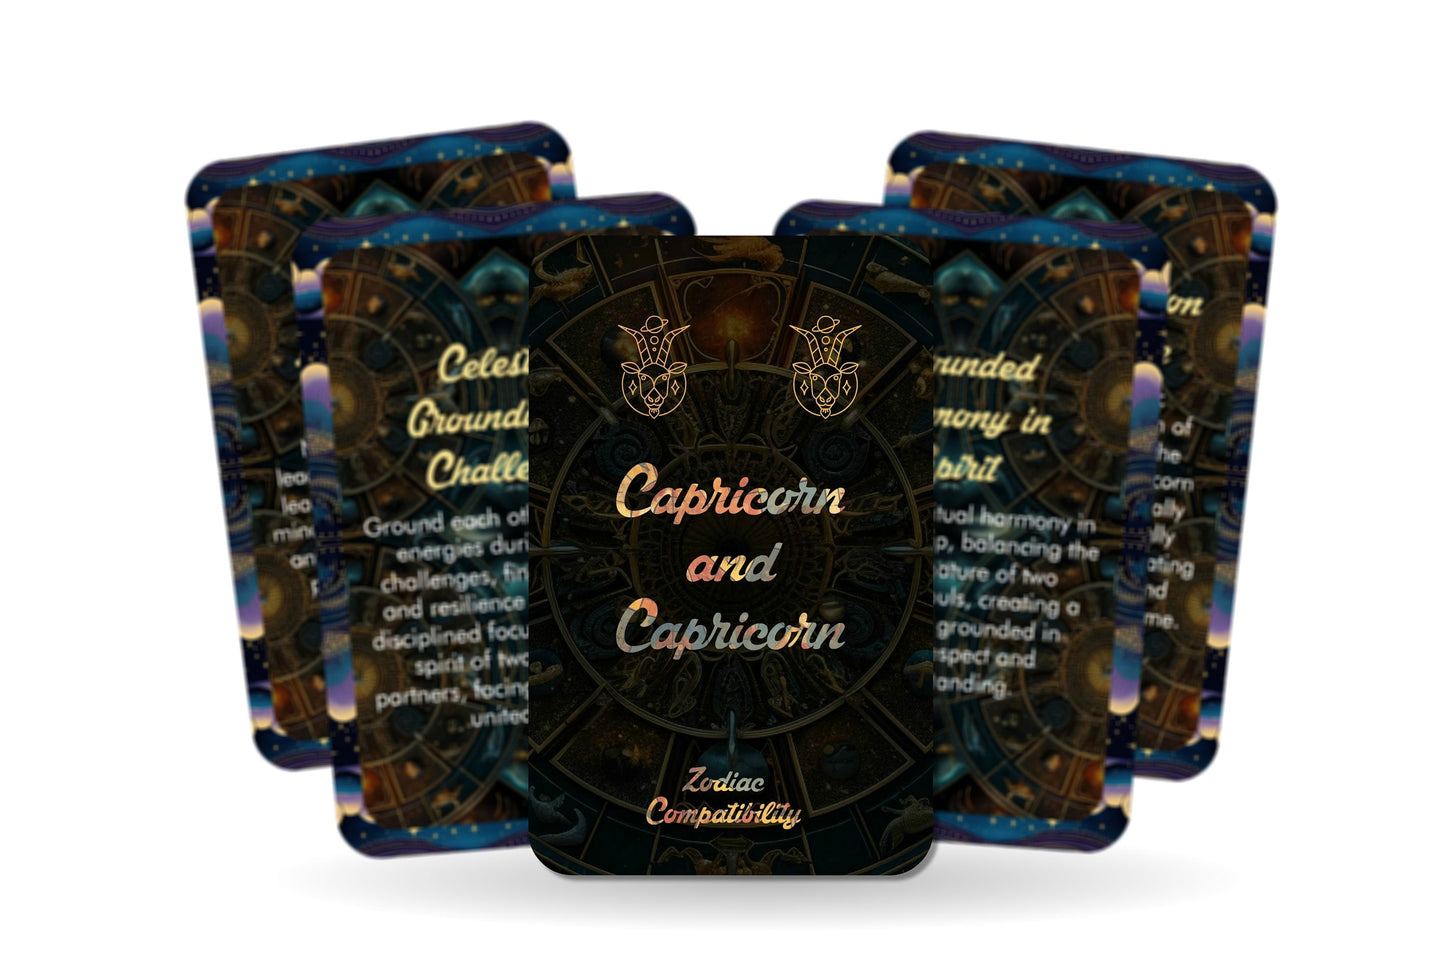 Capricorn and Capricorn - Zodiac Compatibility - Divination tools - Oracle cards - Star Sign Compatibility - Horoscope Compatibility Cards